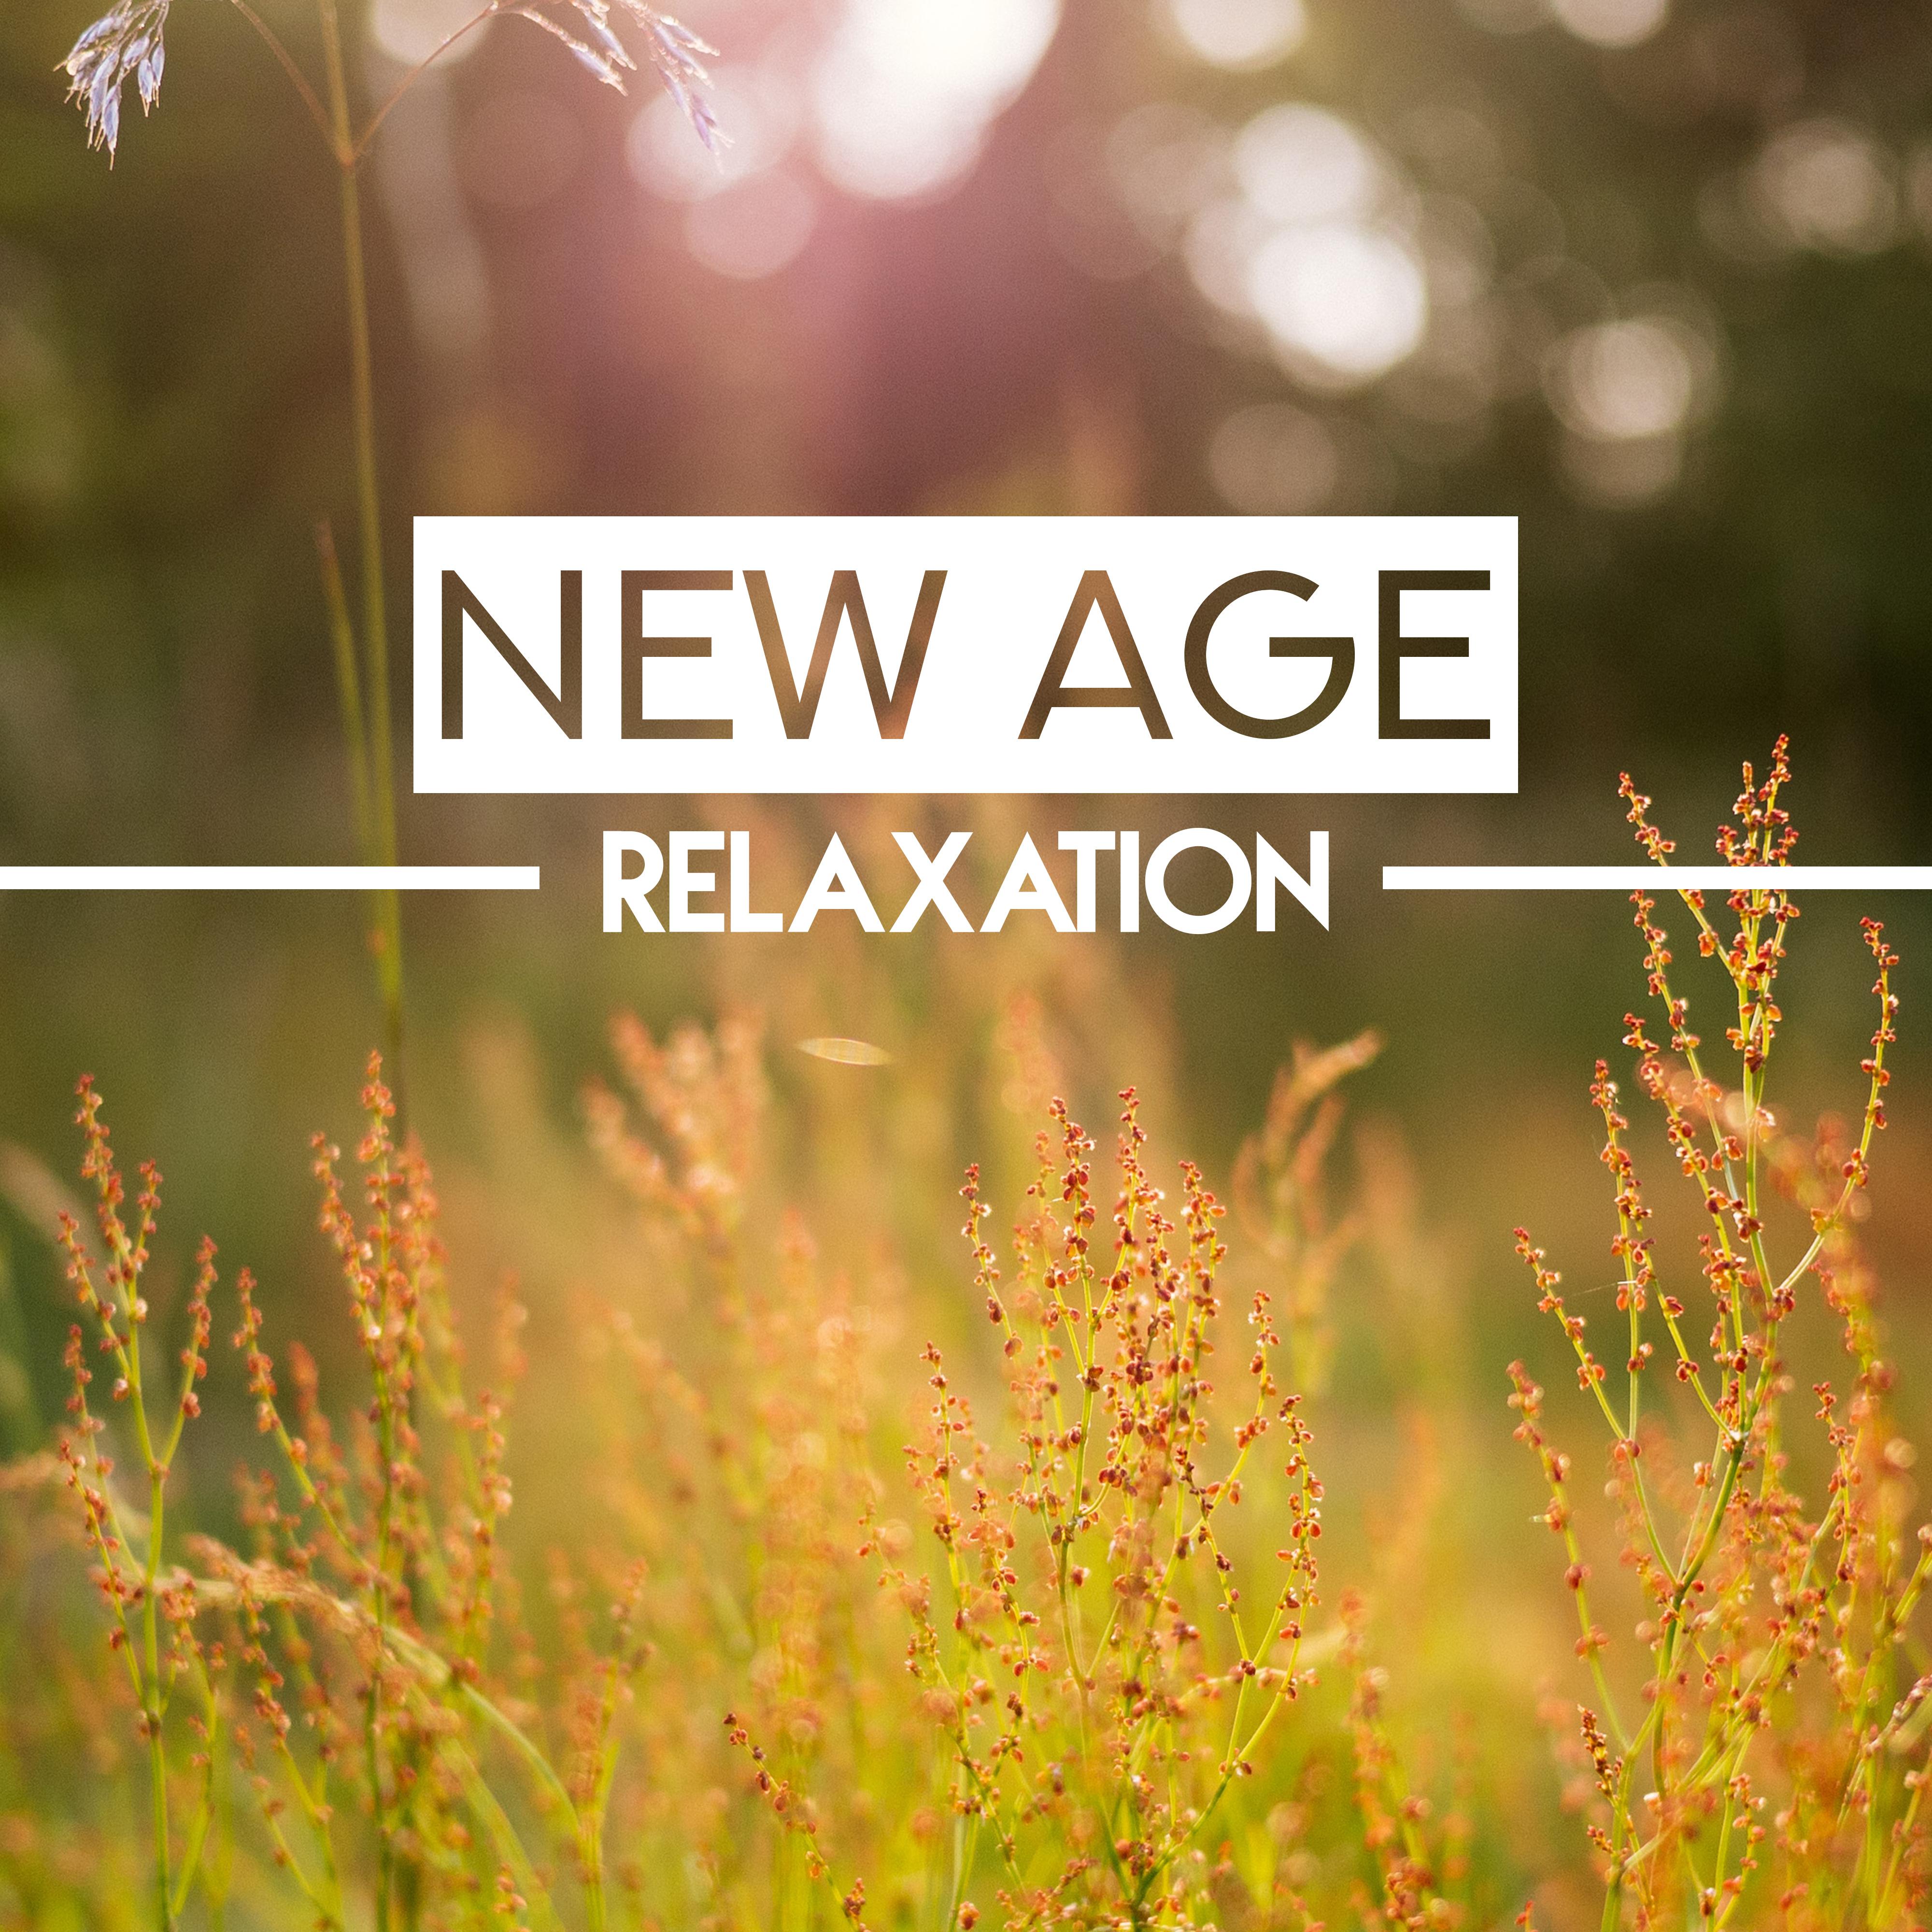 New Age Relaxation  Soothing Music for Mind, Meditate, Pure Chill, Sounds of Nature Relieve Stress, Tranquility